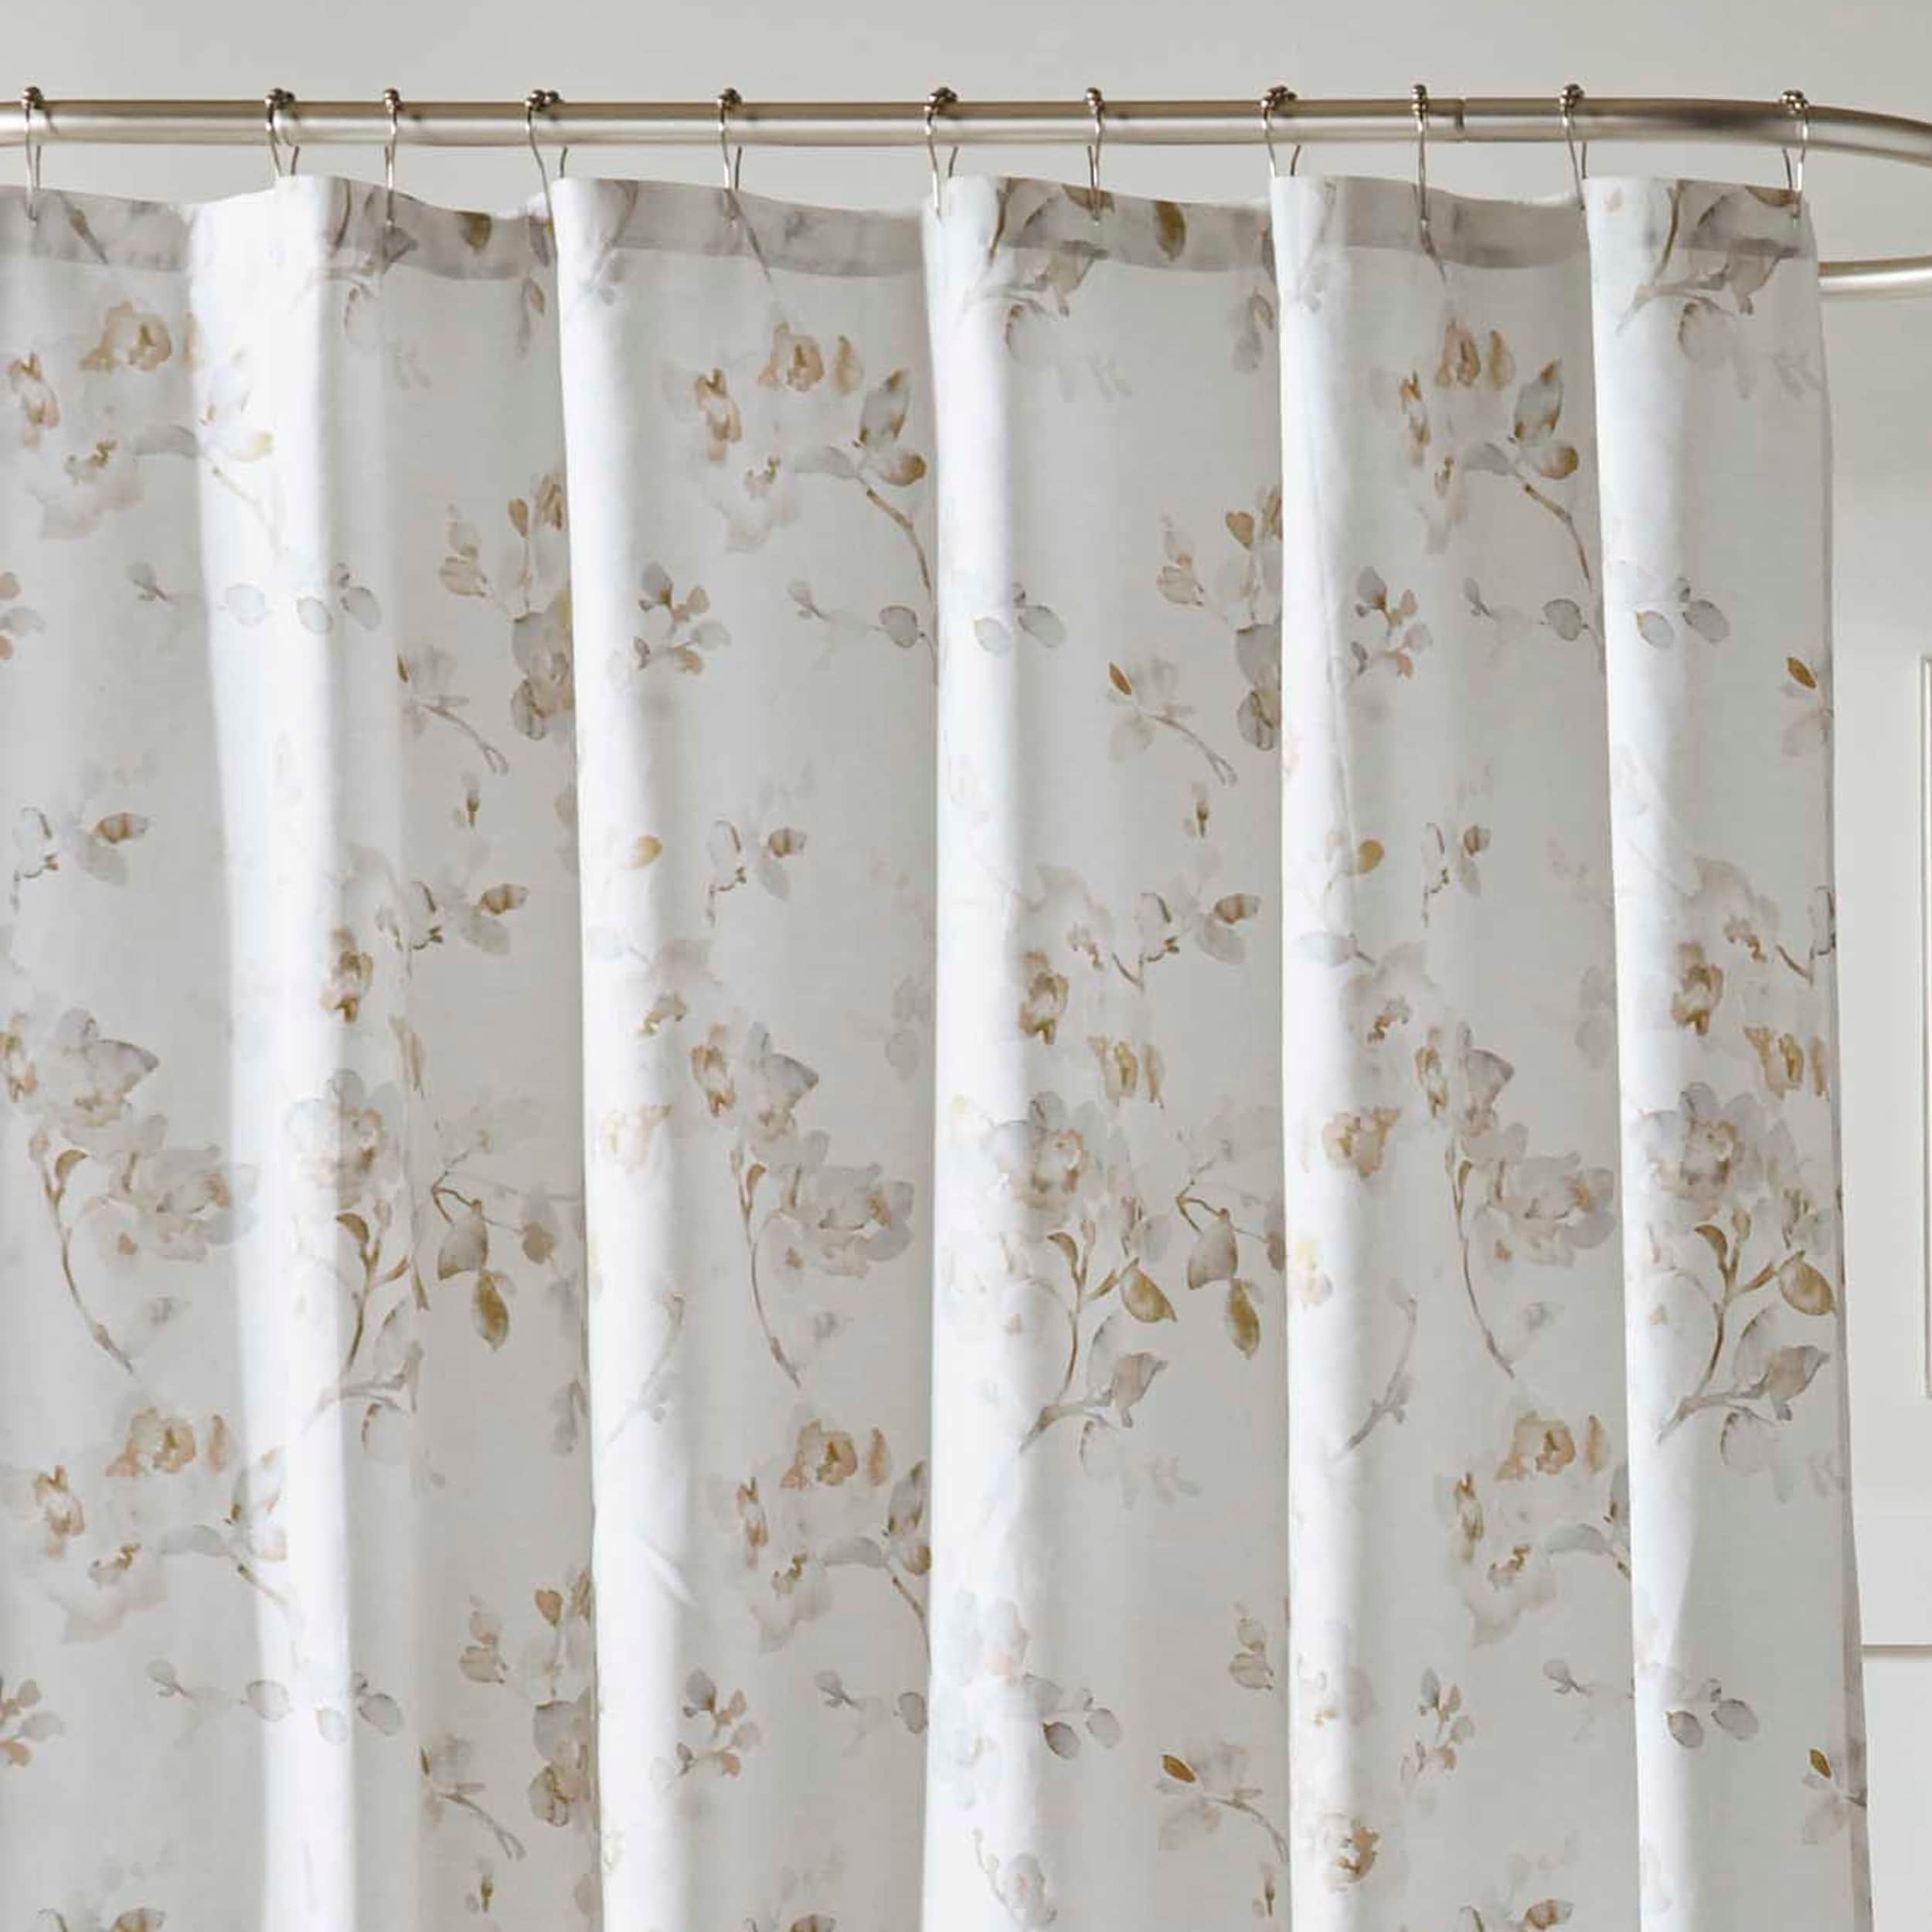 laura ashley shower curtains for sale